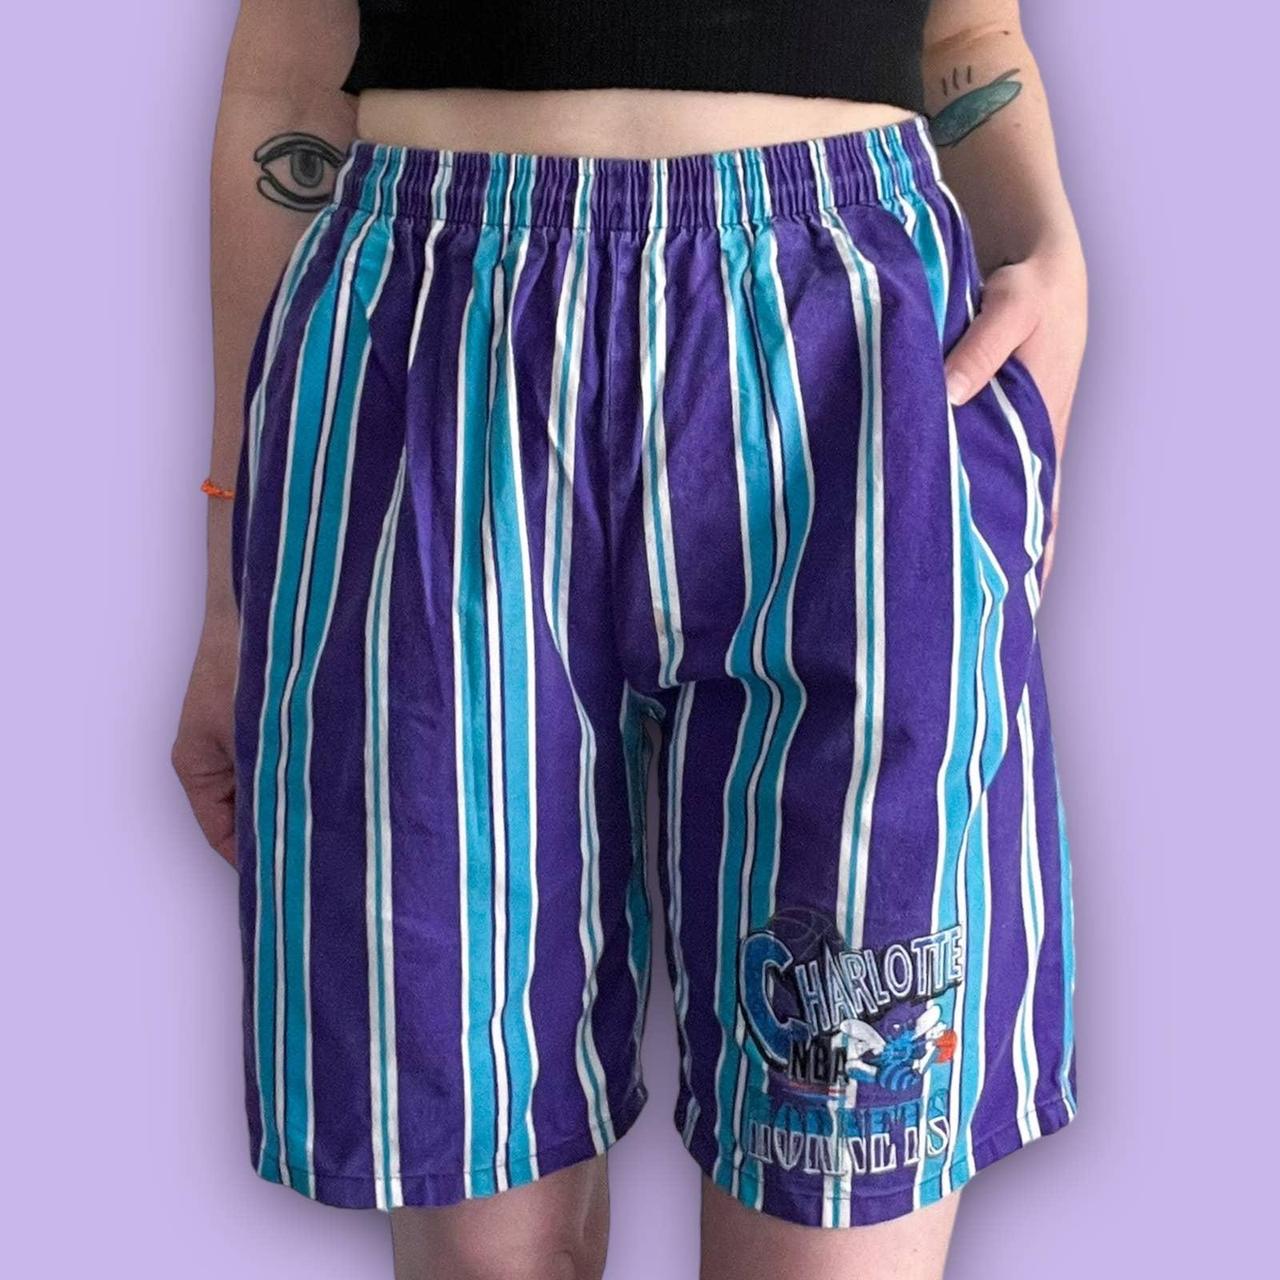 hornets youth shorts